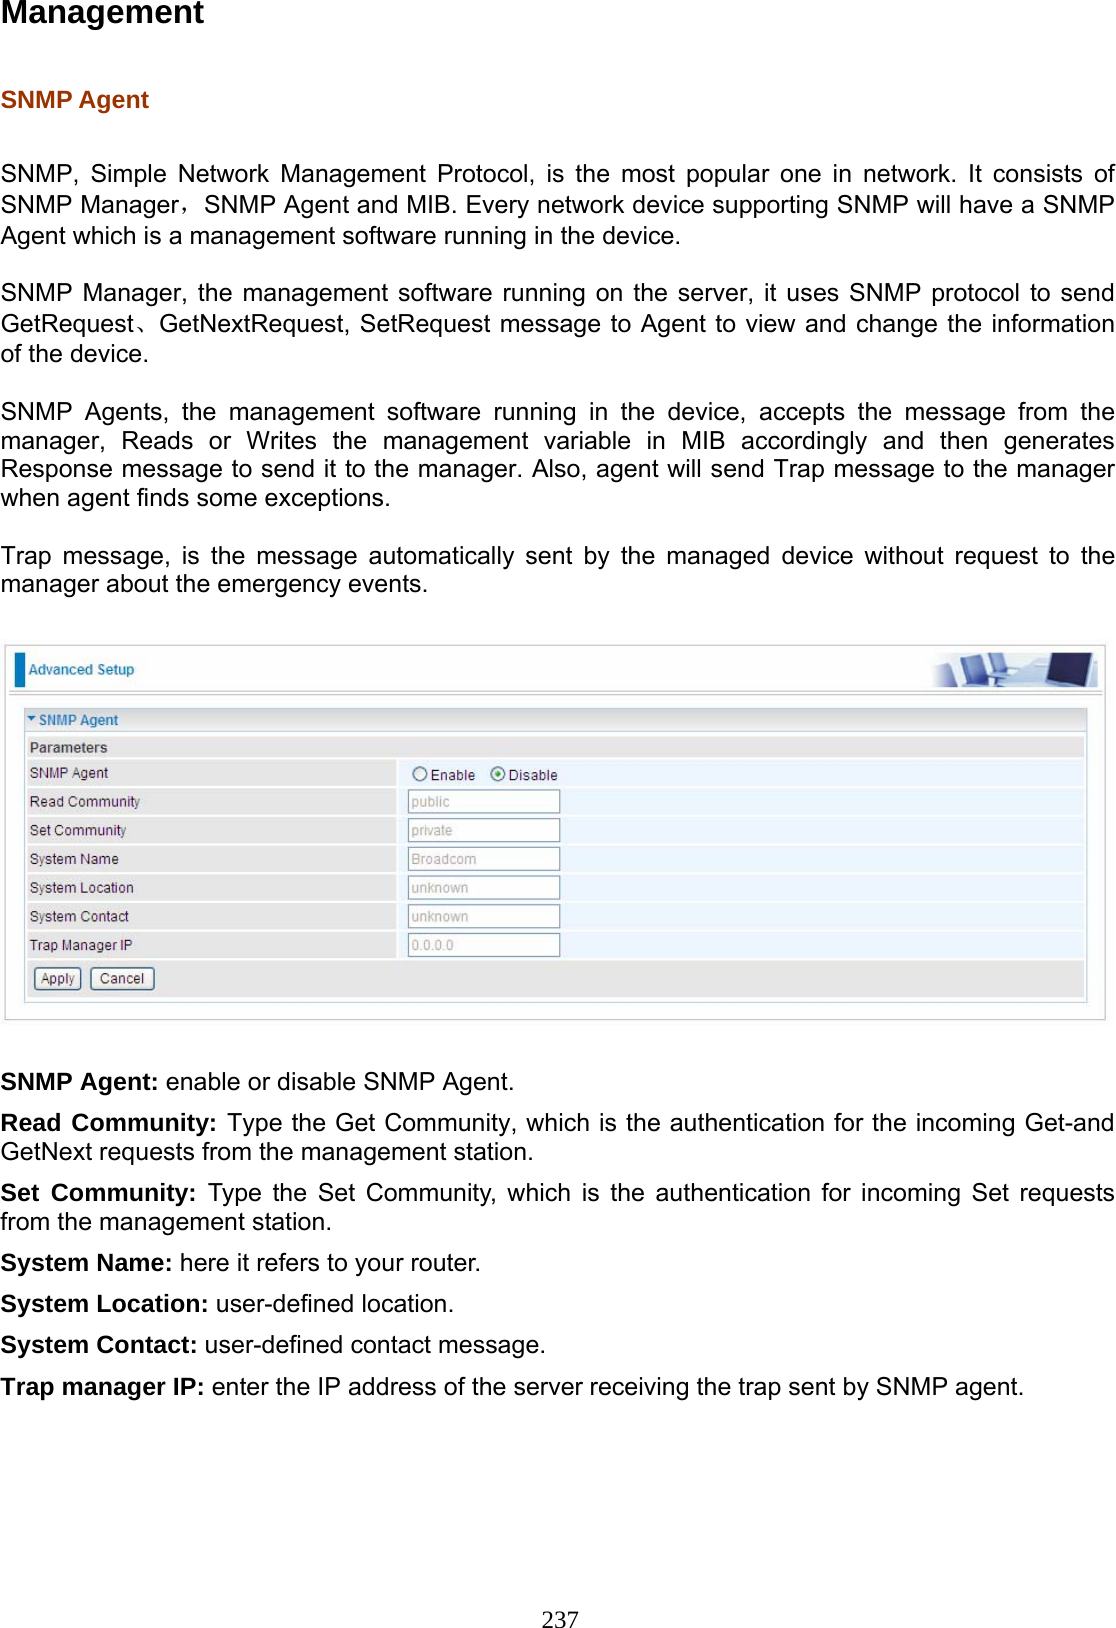 237 Management  SNMP Agent   SNMP, Simple Network Management Protocol, is the most popular one in network. It consists of SNMP Manager，SNMP Agent and MIB. Every network device supporting SNMP will have a SNMP Agent which is a management software running in the device.   SNMP Manager, the management software running on the server, it uses SNMP protocol to send GetRequest、GetNextRequest, SetRequest message to Agent to view and change the information of the device.  SNMP Agents, the management software running in the device, accepts the message from the manager, Reads or Writes the management variable in MIB accordingly and then generates Response message to send it to the manager. Also, agent will send Trap message to the manager when agent finds some exceptions.   Trap message, is the message automatically sent by the managed device without request to the manager about the emergency events.    SNMP Agent: enable or disable SNMP Agent.  Read Community: Type the Get Community, which is the authentication for the incoming Get-and GetNext requests from the management station.  Set Community: Type the Set Community, which is the authentication for incoming Set requests from the management station.  System Name: here it refers to your router. System Location: user-defined location. System Contact: user-defined contact message. Trap manager IP: enter the IP address of the server receiving the trap sent by SNMP agent.   